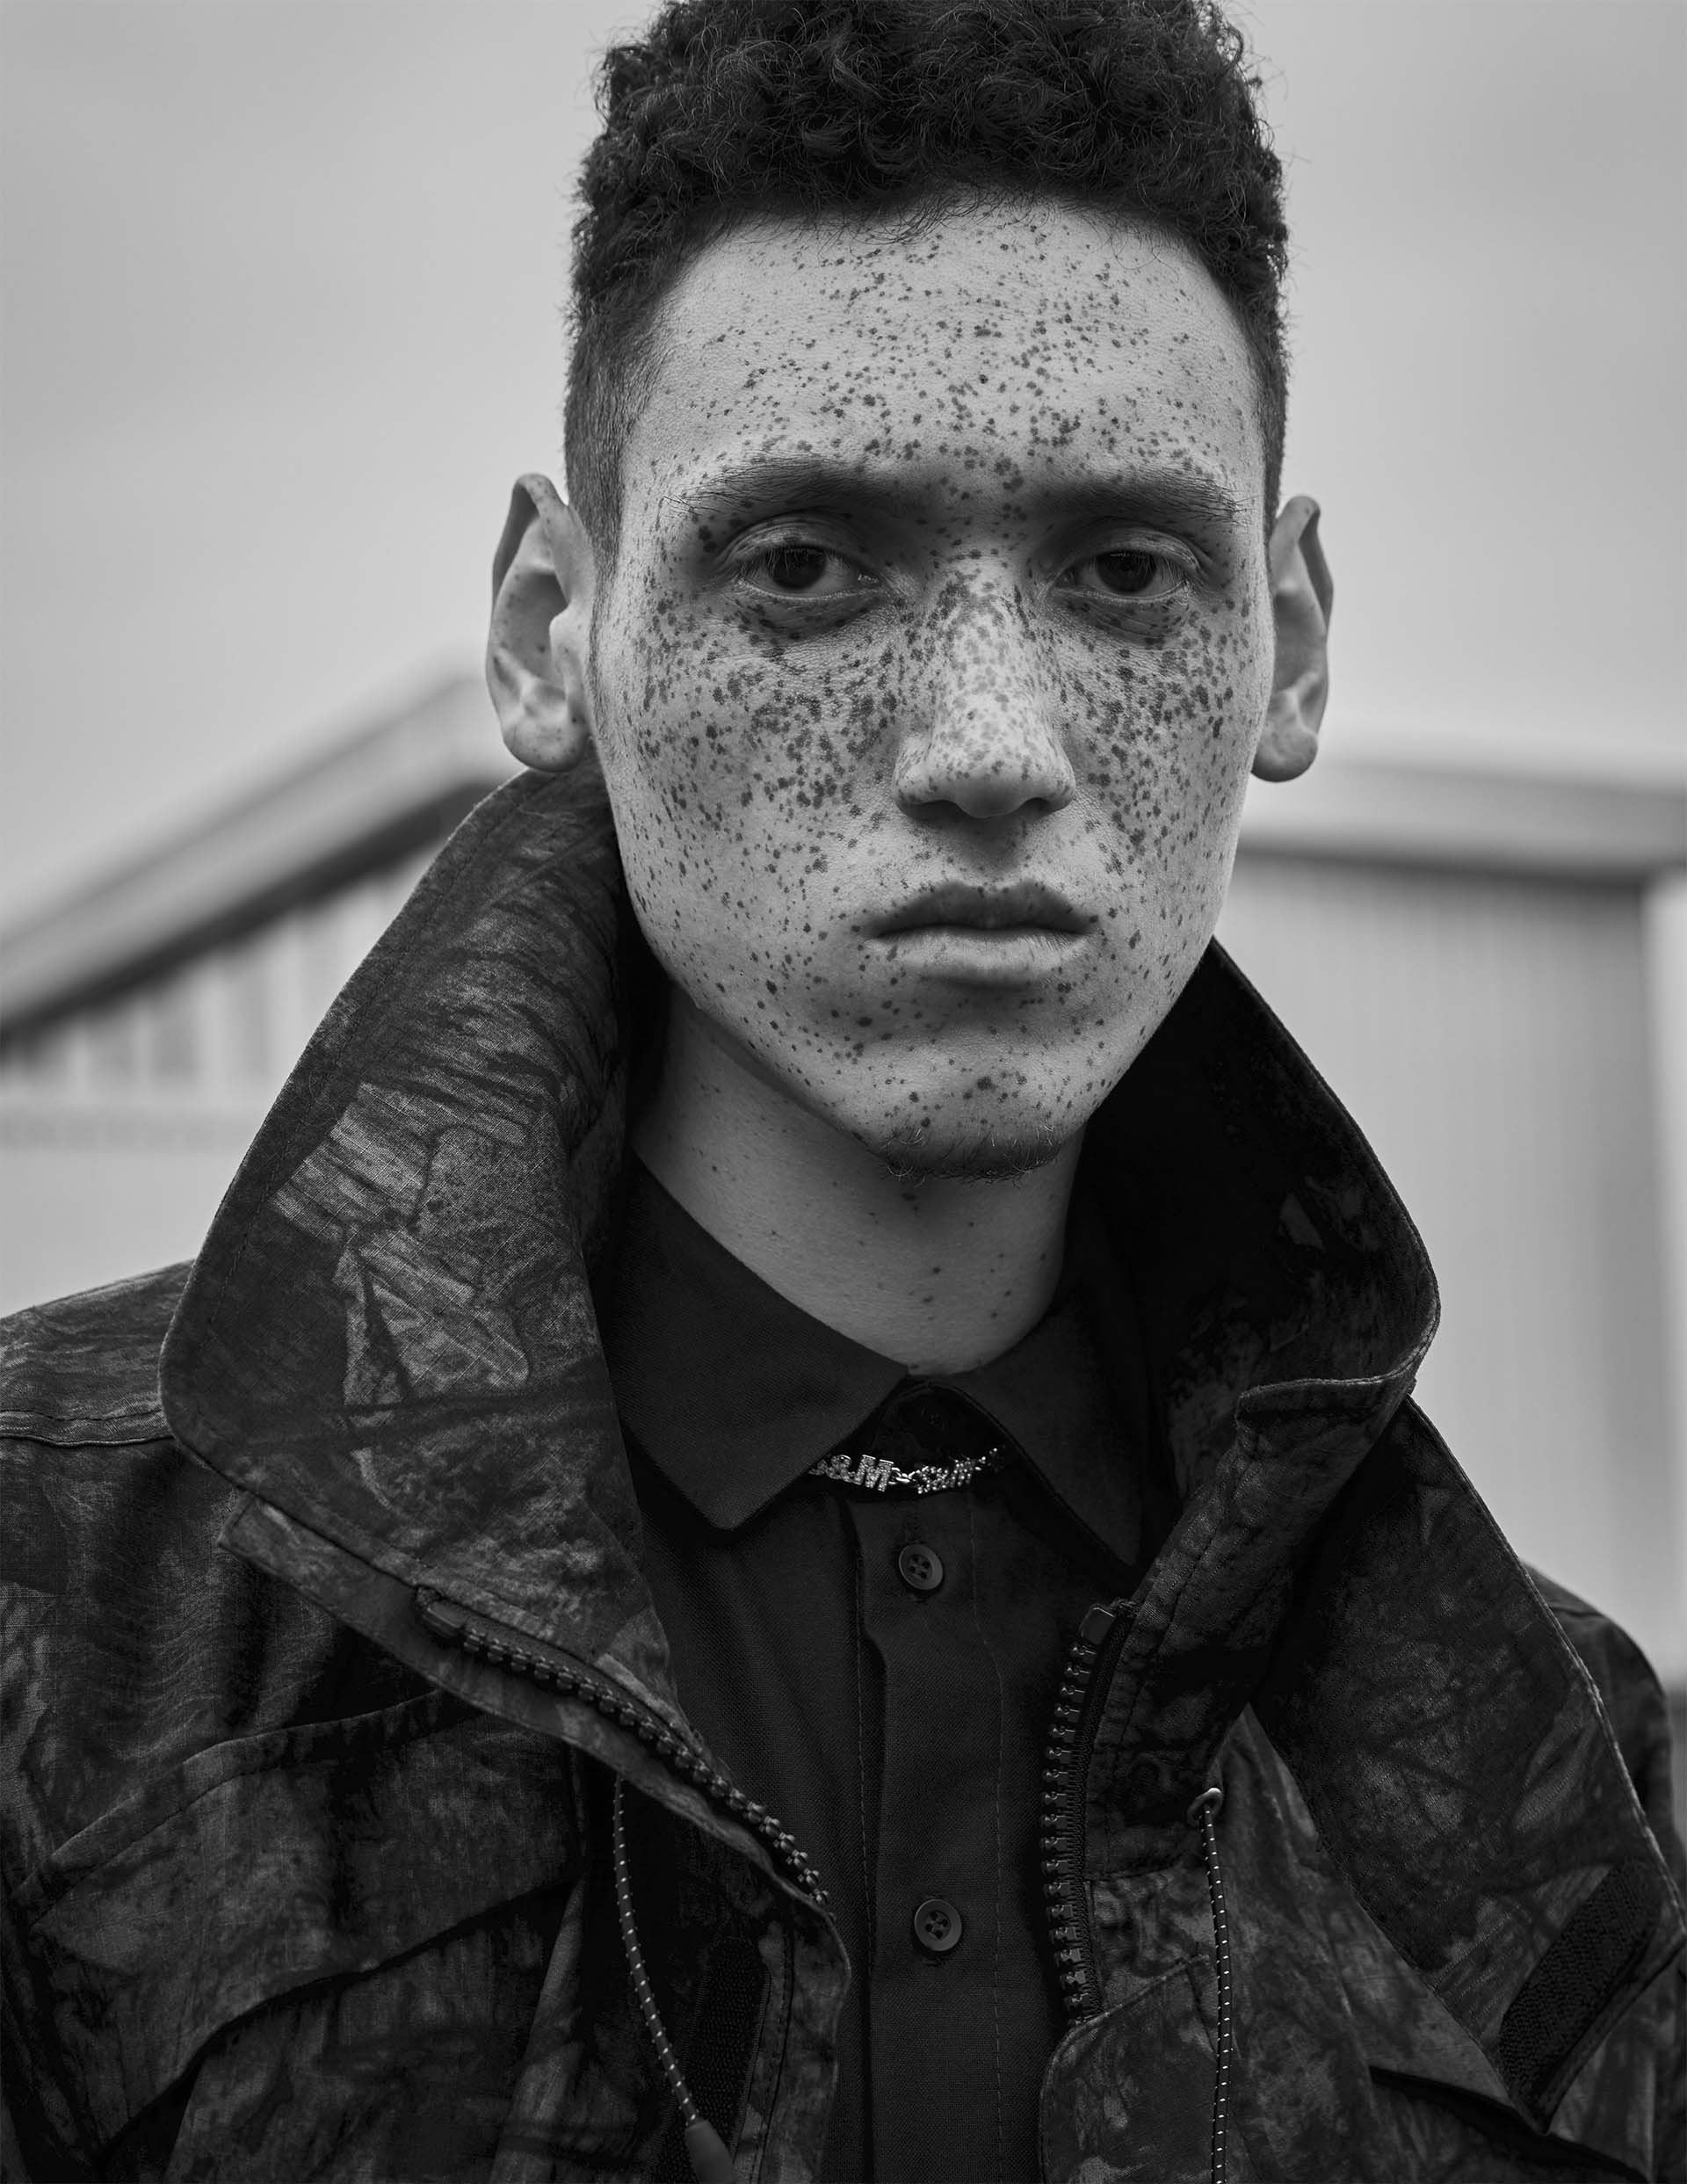 Jordan British Youth by Rama Lee for Schon